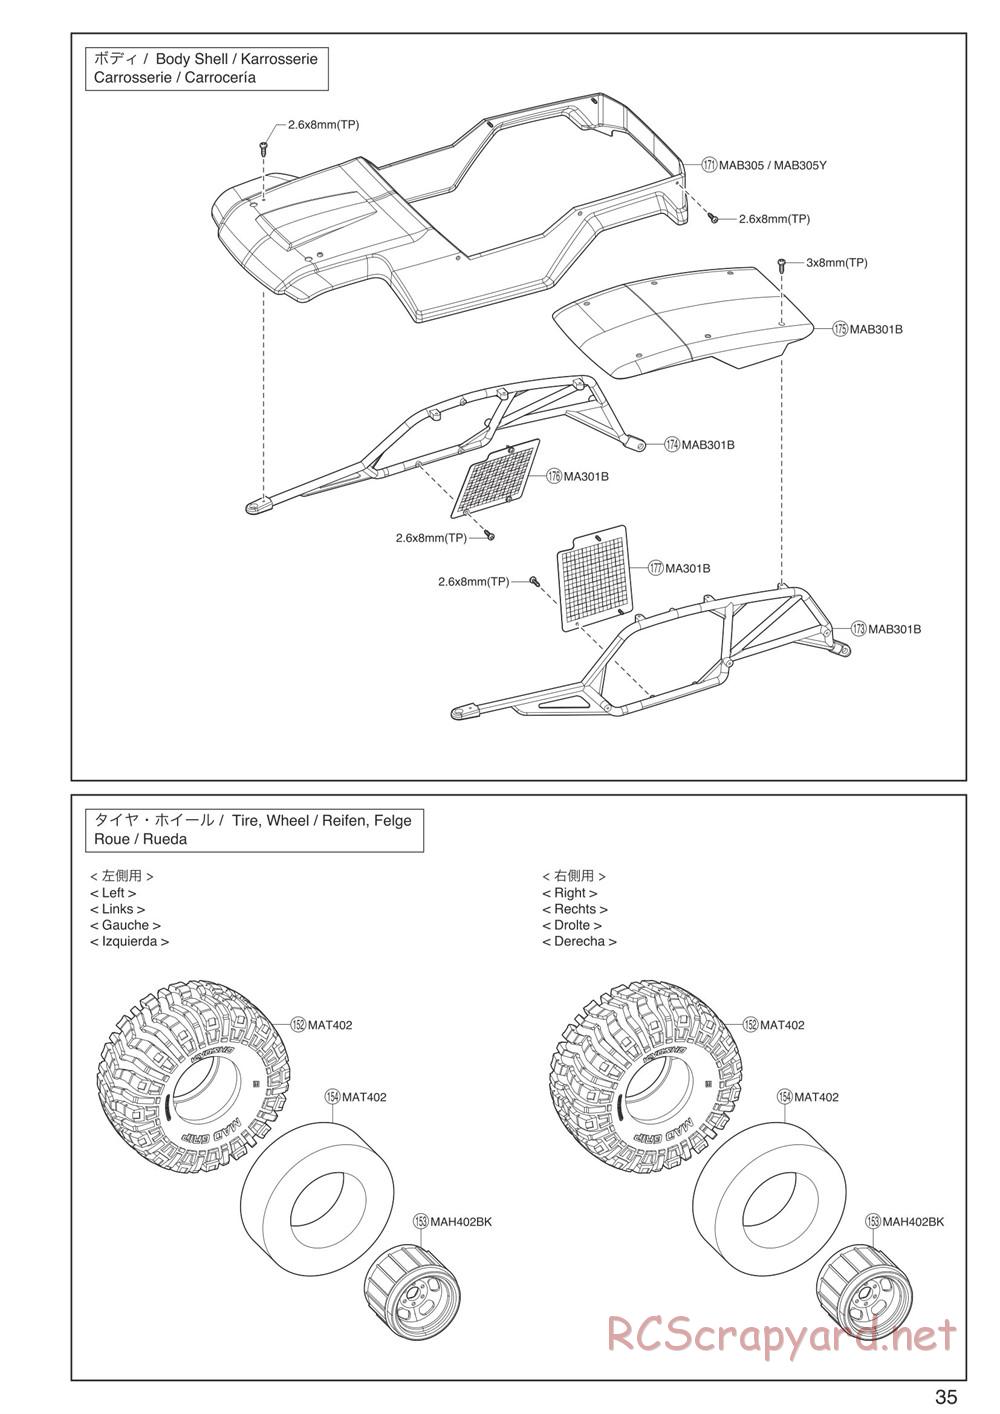 Kyosho - FO-XX VE 2.0 - Manual - Page 34